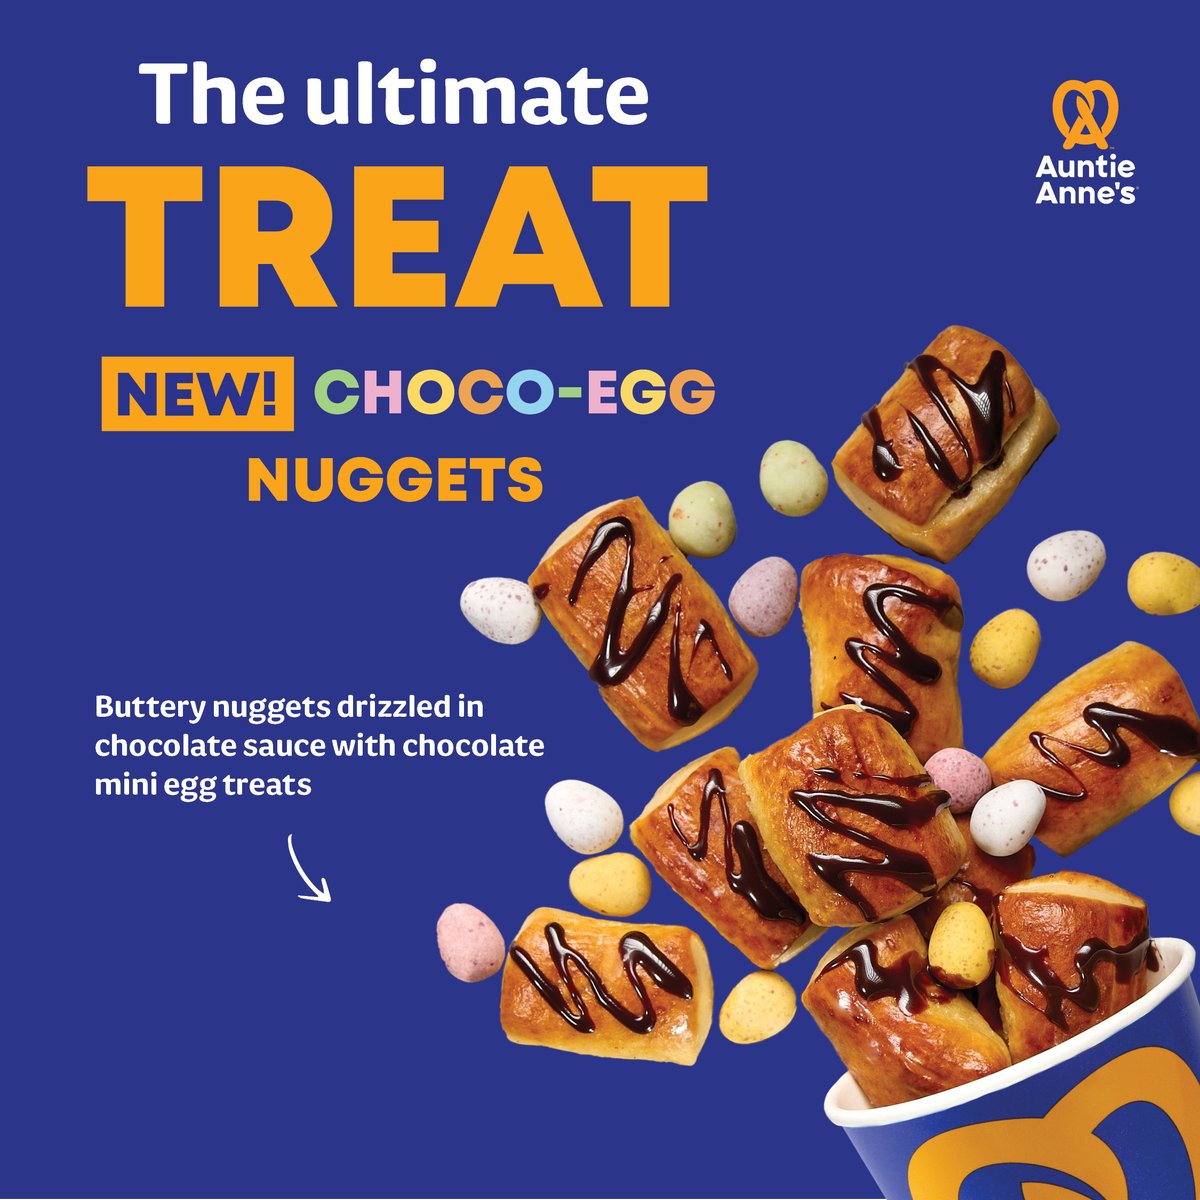 The ultimate Easter treat from Auntie Anne's these new Choco-Egg nuggets have to be tried!. Get them at the stand in our Central square today. #auntieannes #chocoeggnuggets #eastertreat #yourcityyourilac #believeindublin #shophereeathere